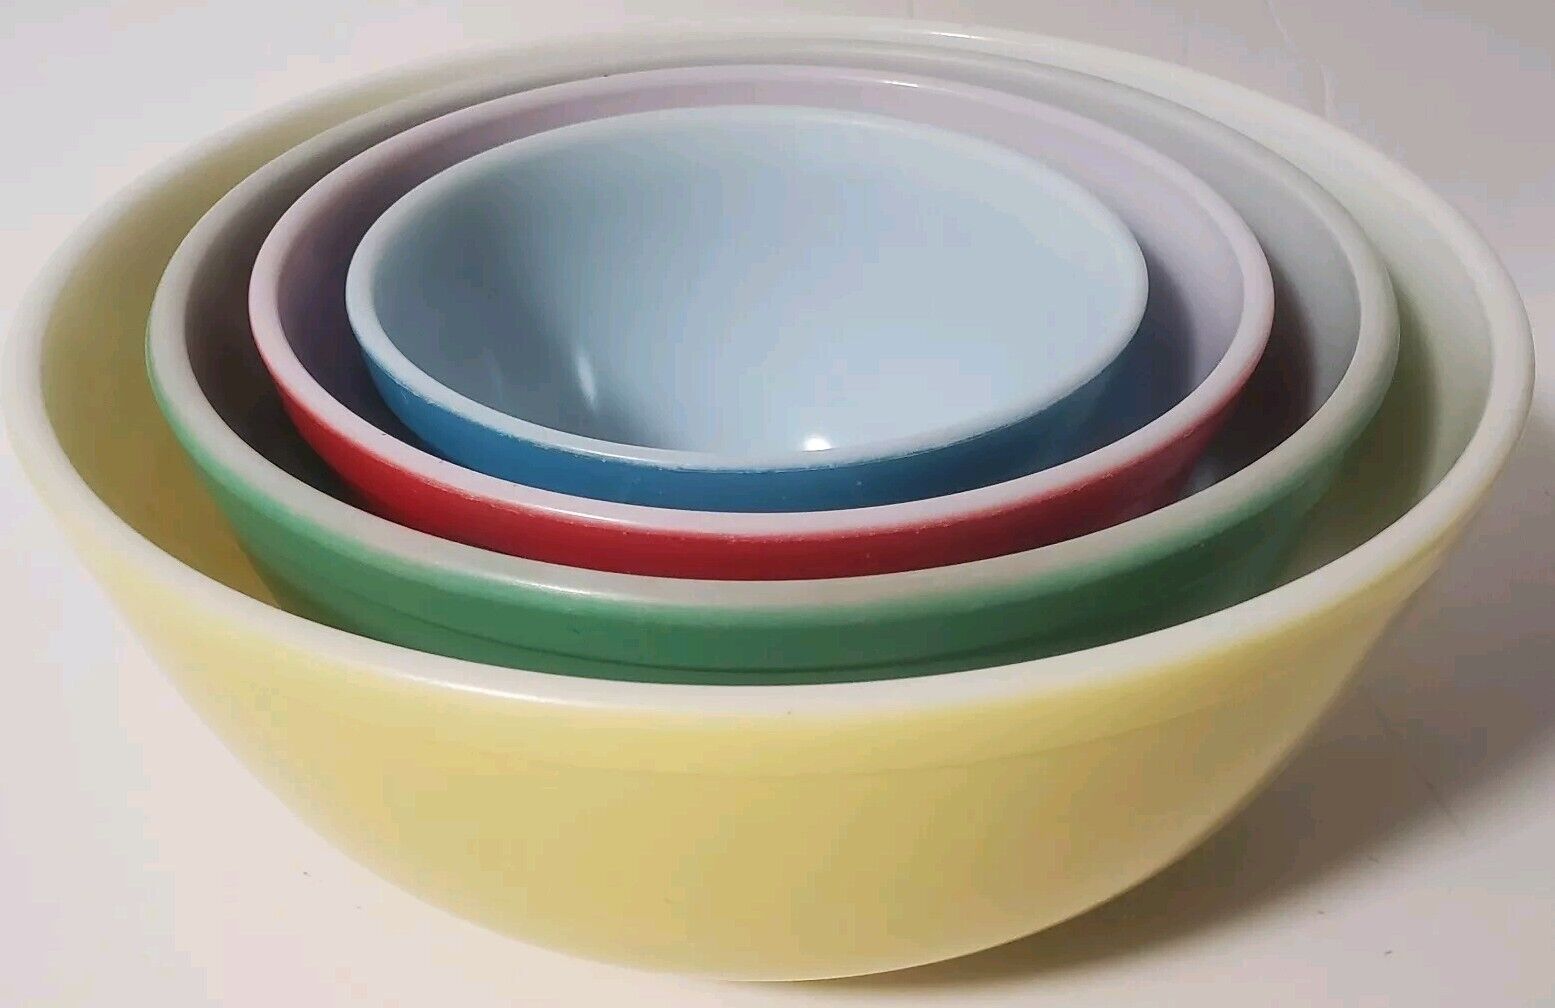 Vintage Lot 4x PYREX PRIMARY COLOR Mixing Bowls, Yellow Green Red Blue 2qt Set 